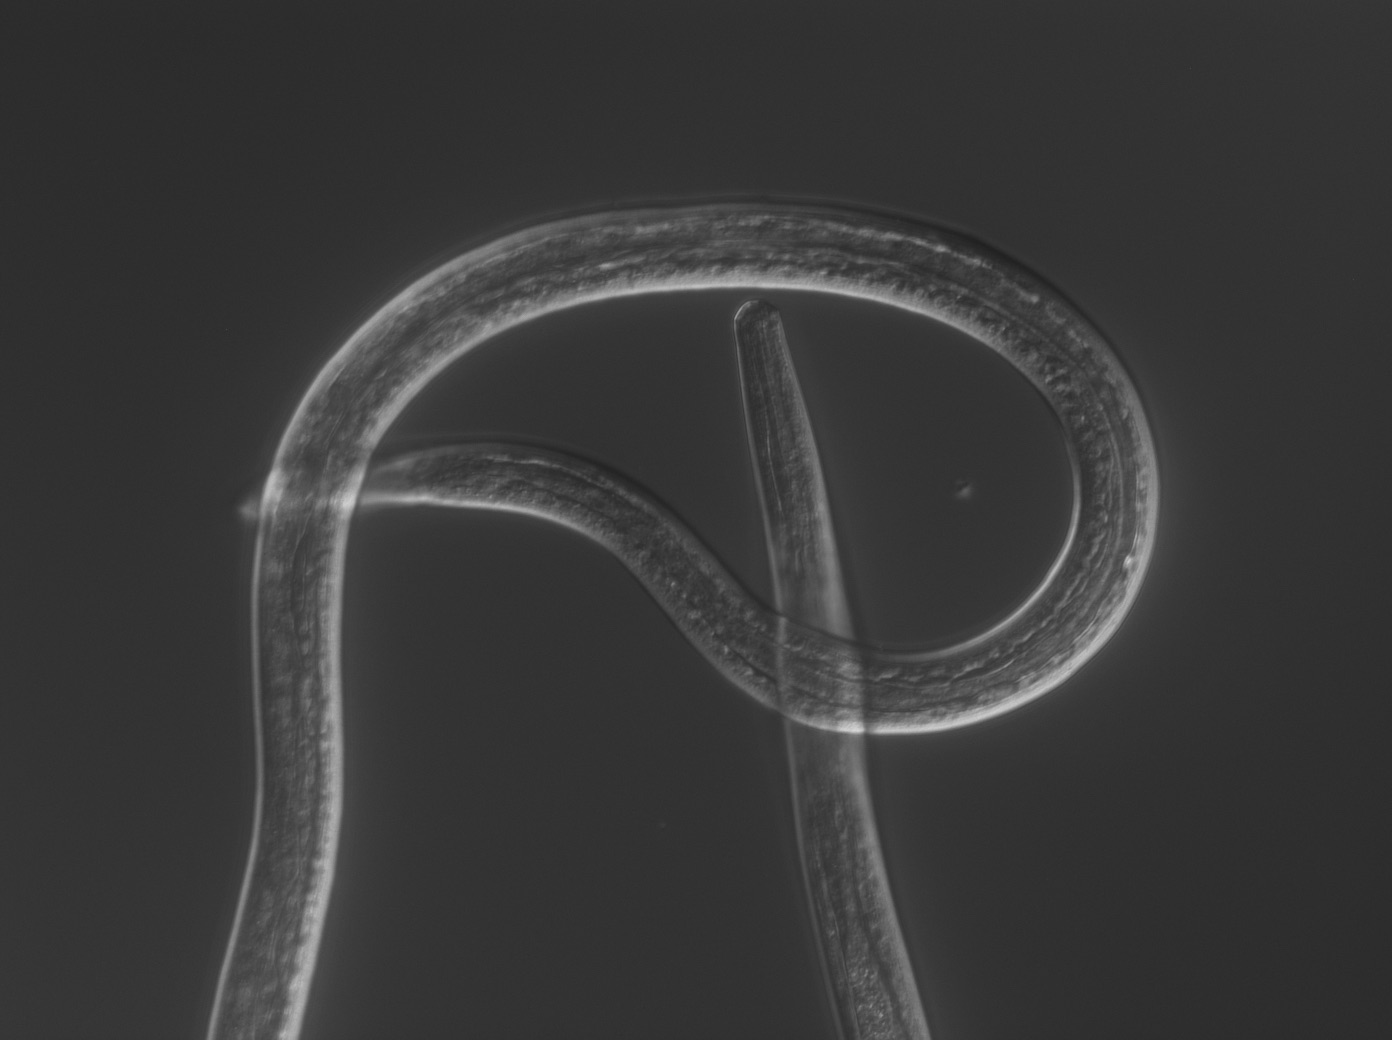 Nematodes in medical research